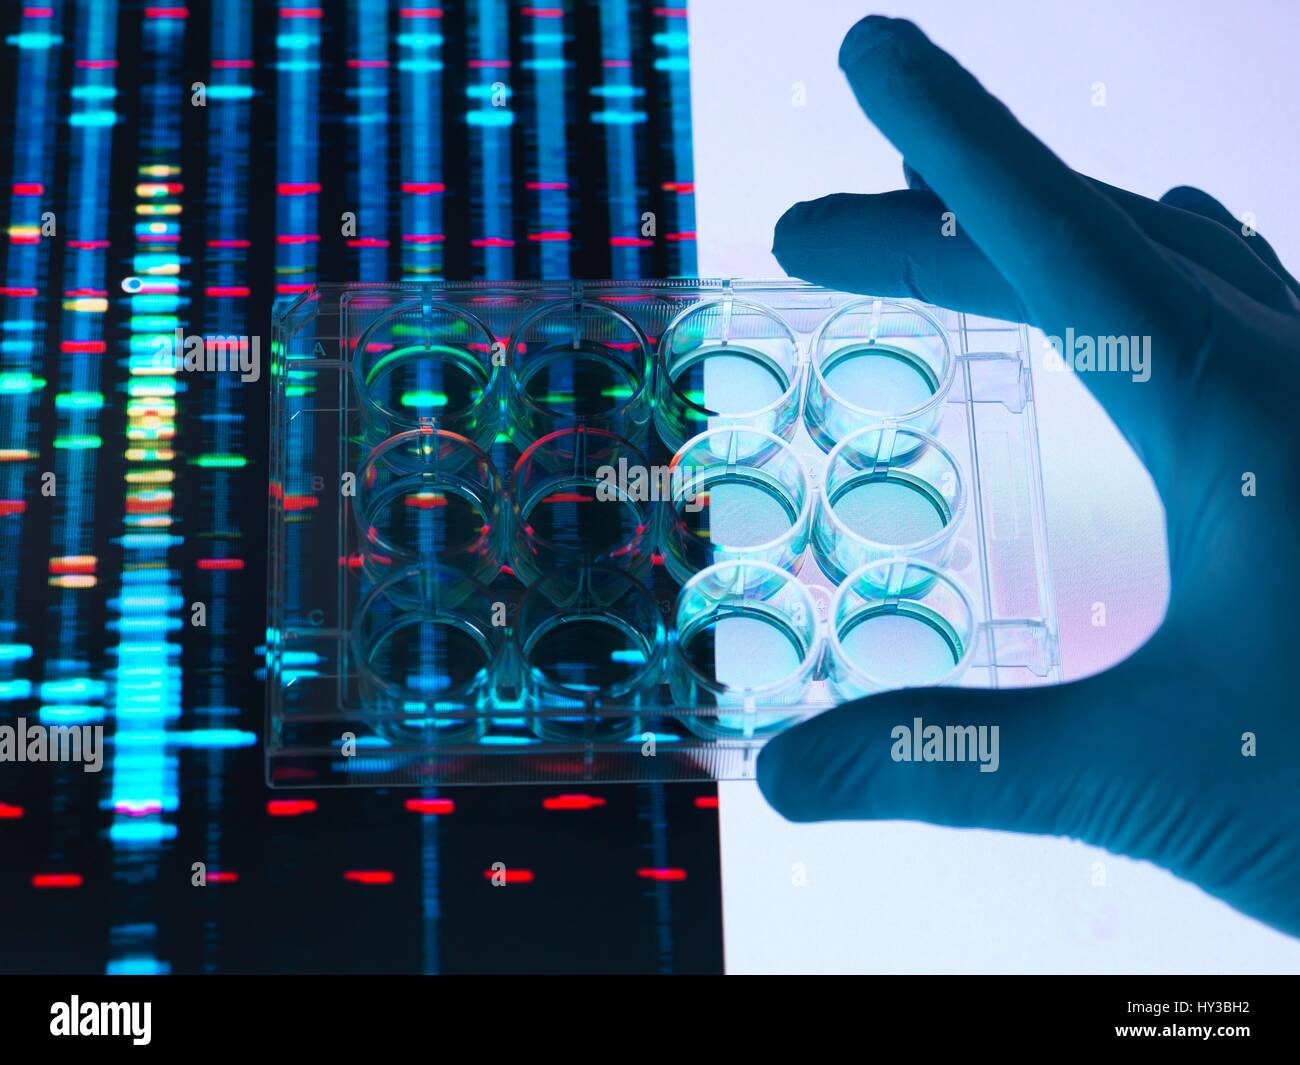 A sample of DNA (deoxyribonucleic acid) being pipetted into a petri dish with DNA results in the background. Stock Photo